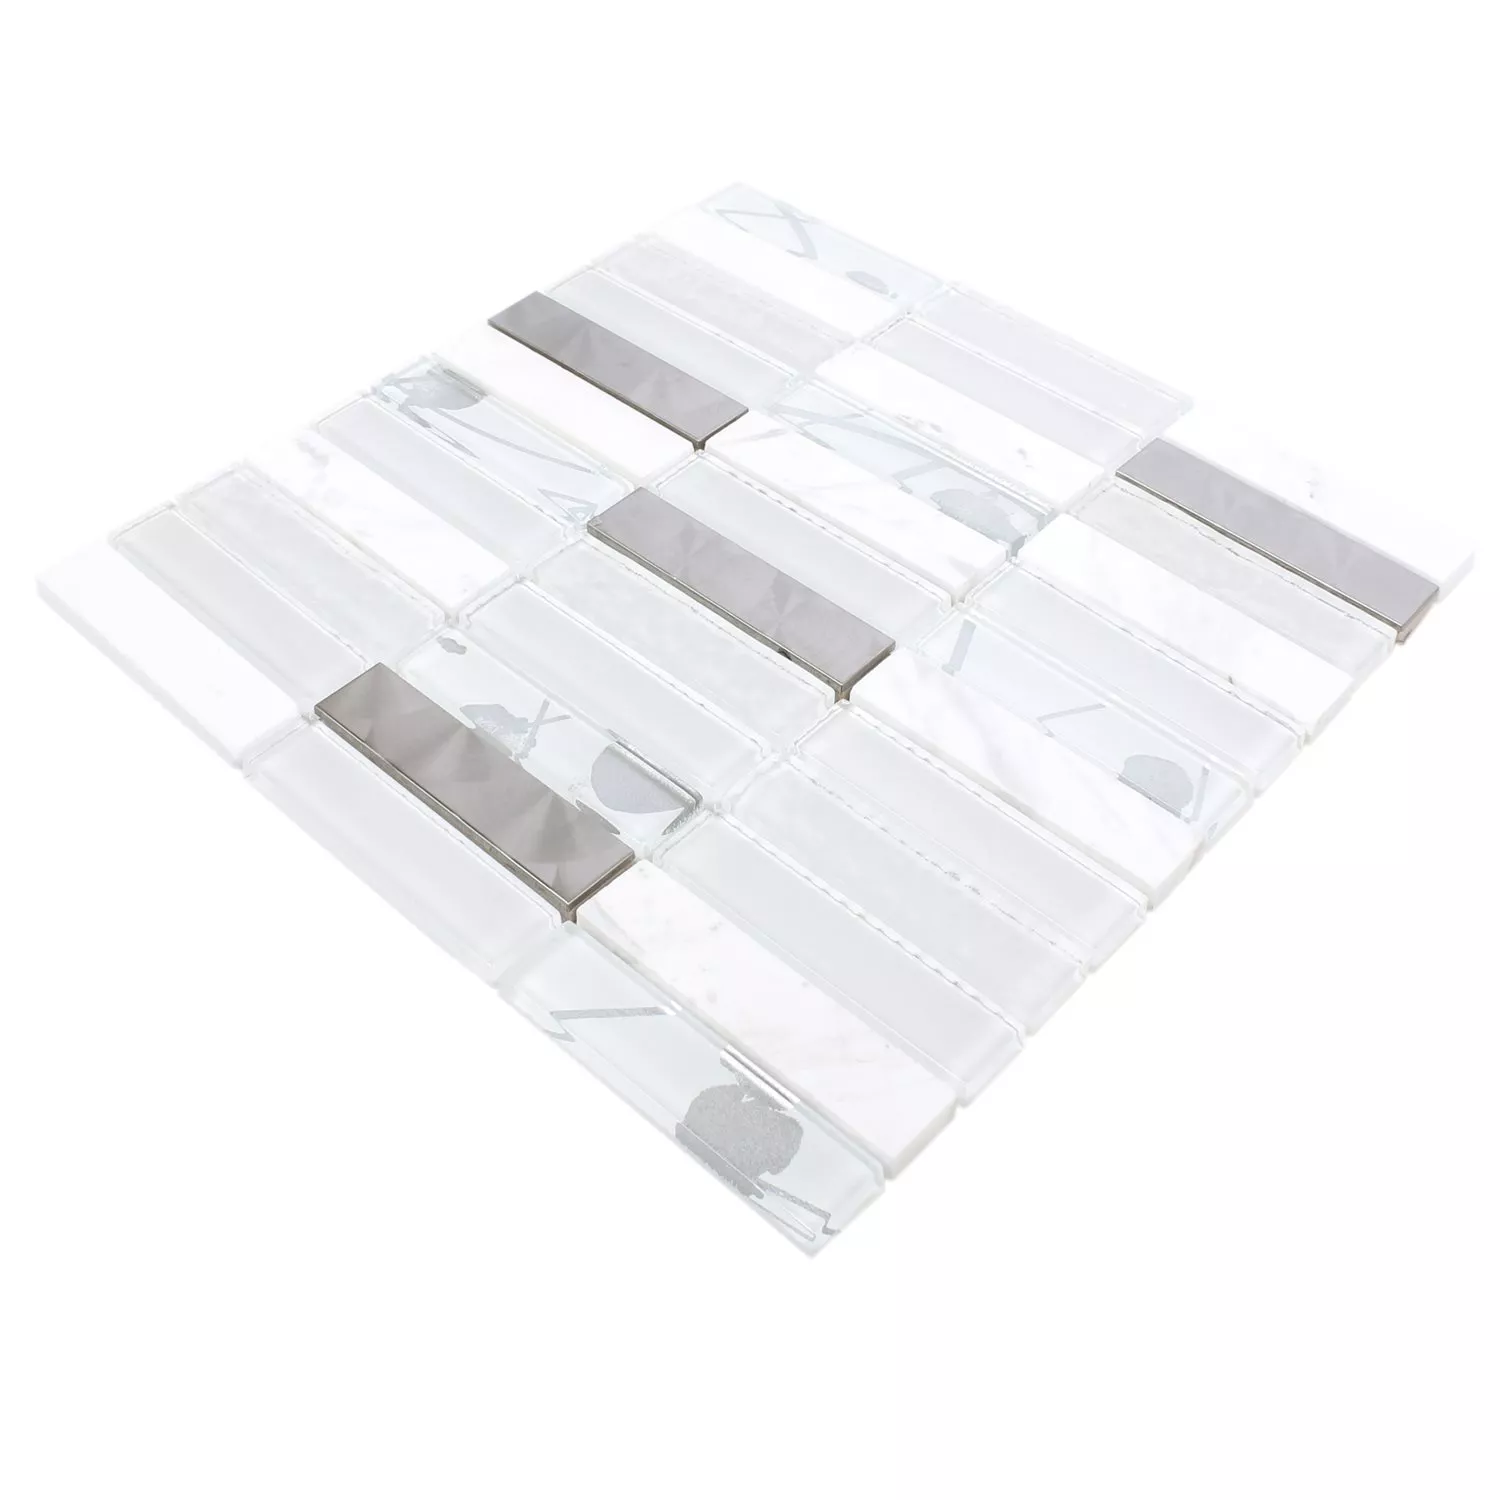 Sample Mosaic Tiles Musical Glass Stone Steel Mix White